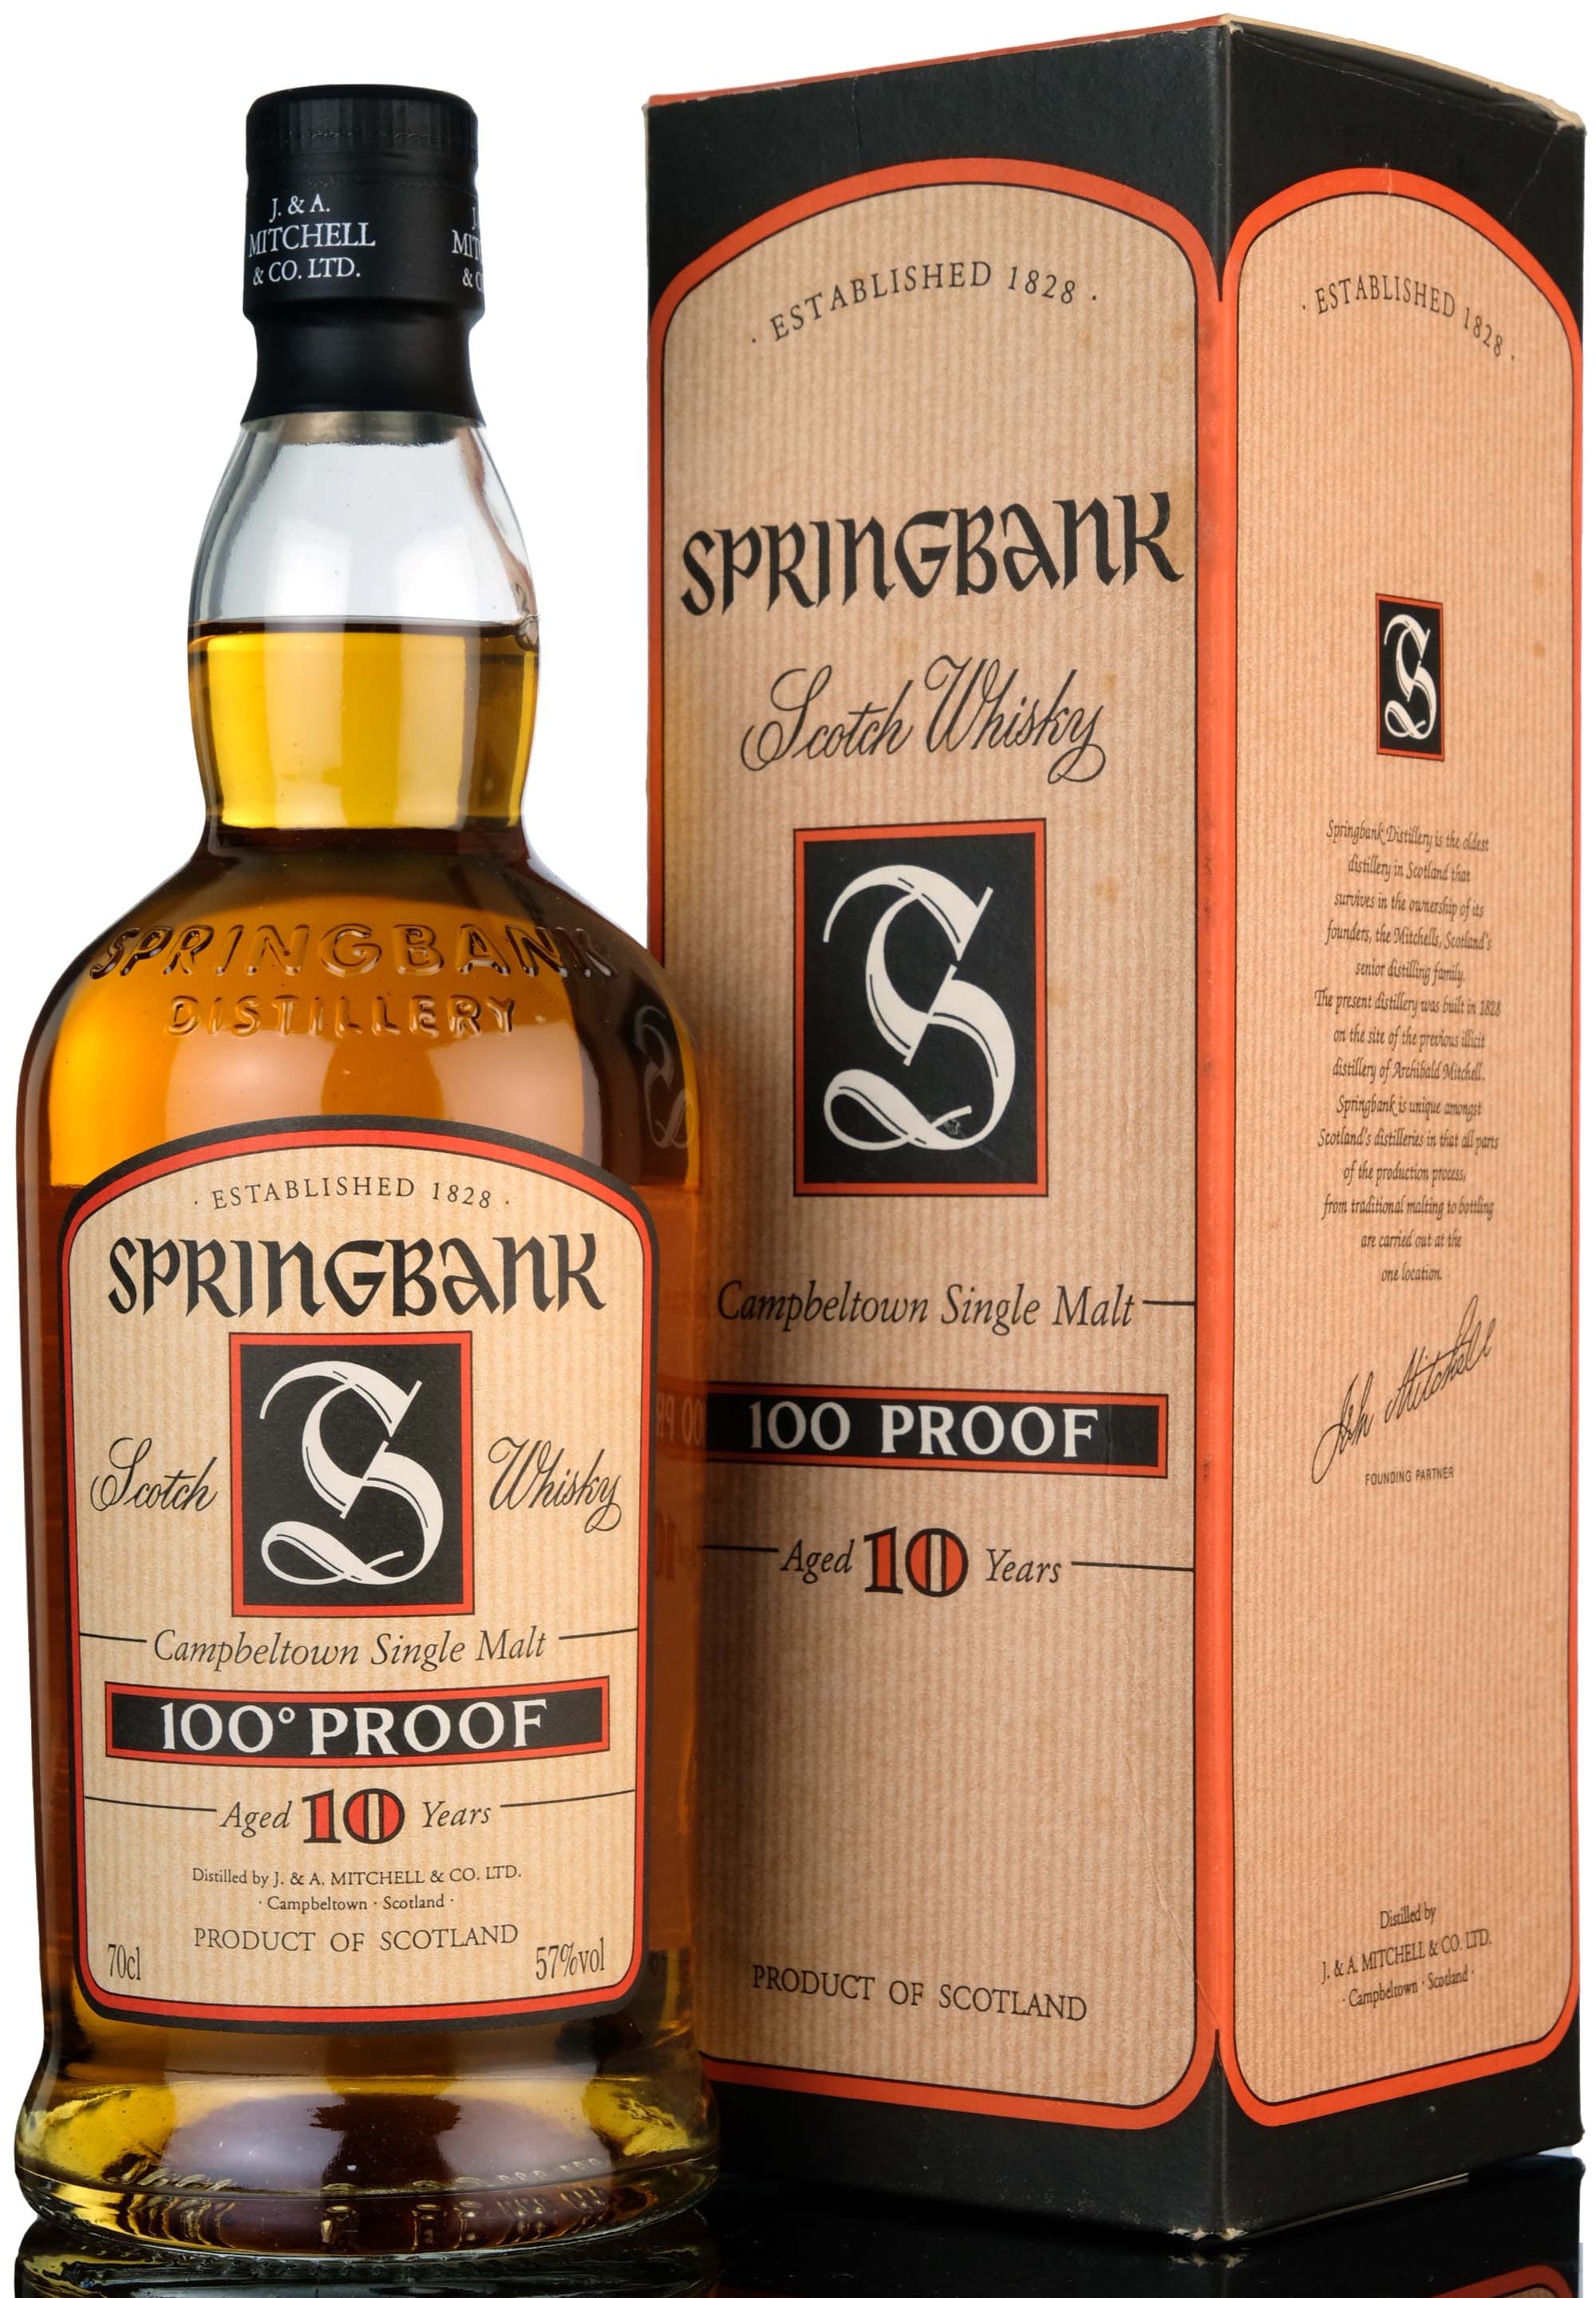 Springbank 10 Year Old - 100 Proof - 2005 Release